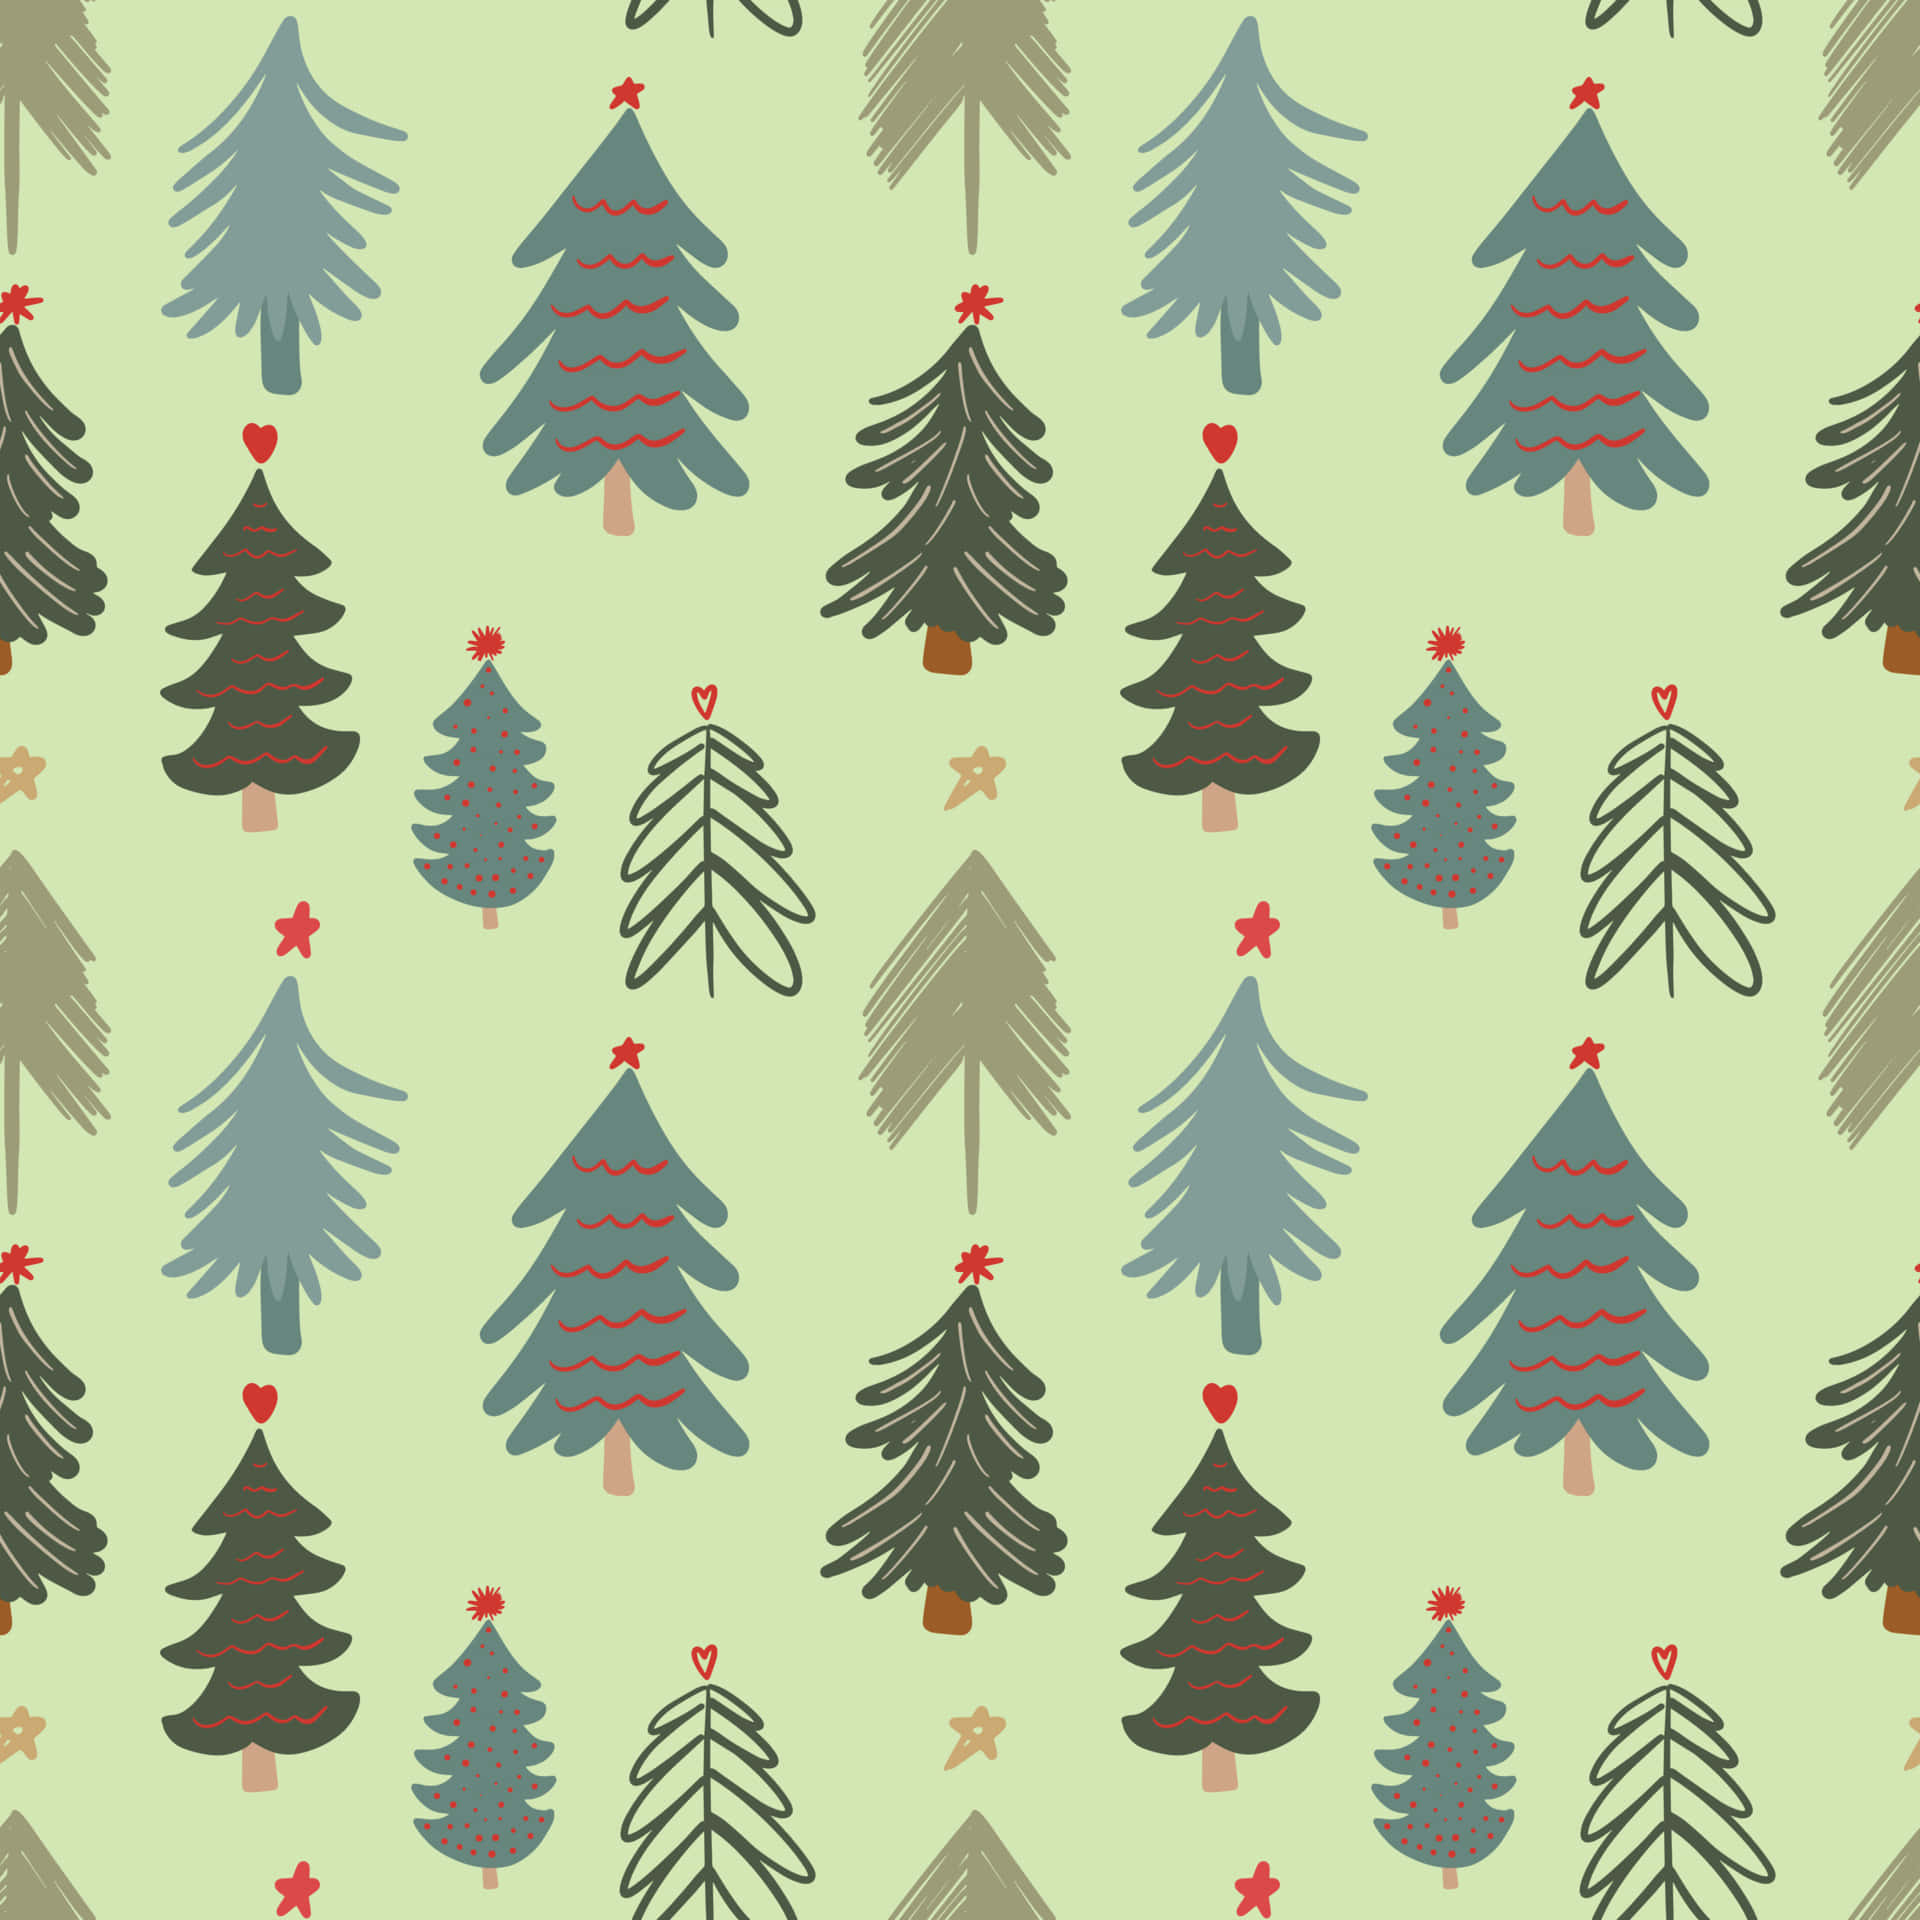 A festive and cute Christmas background